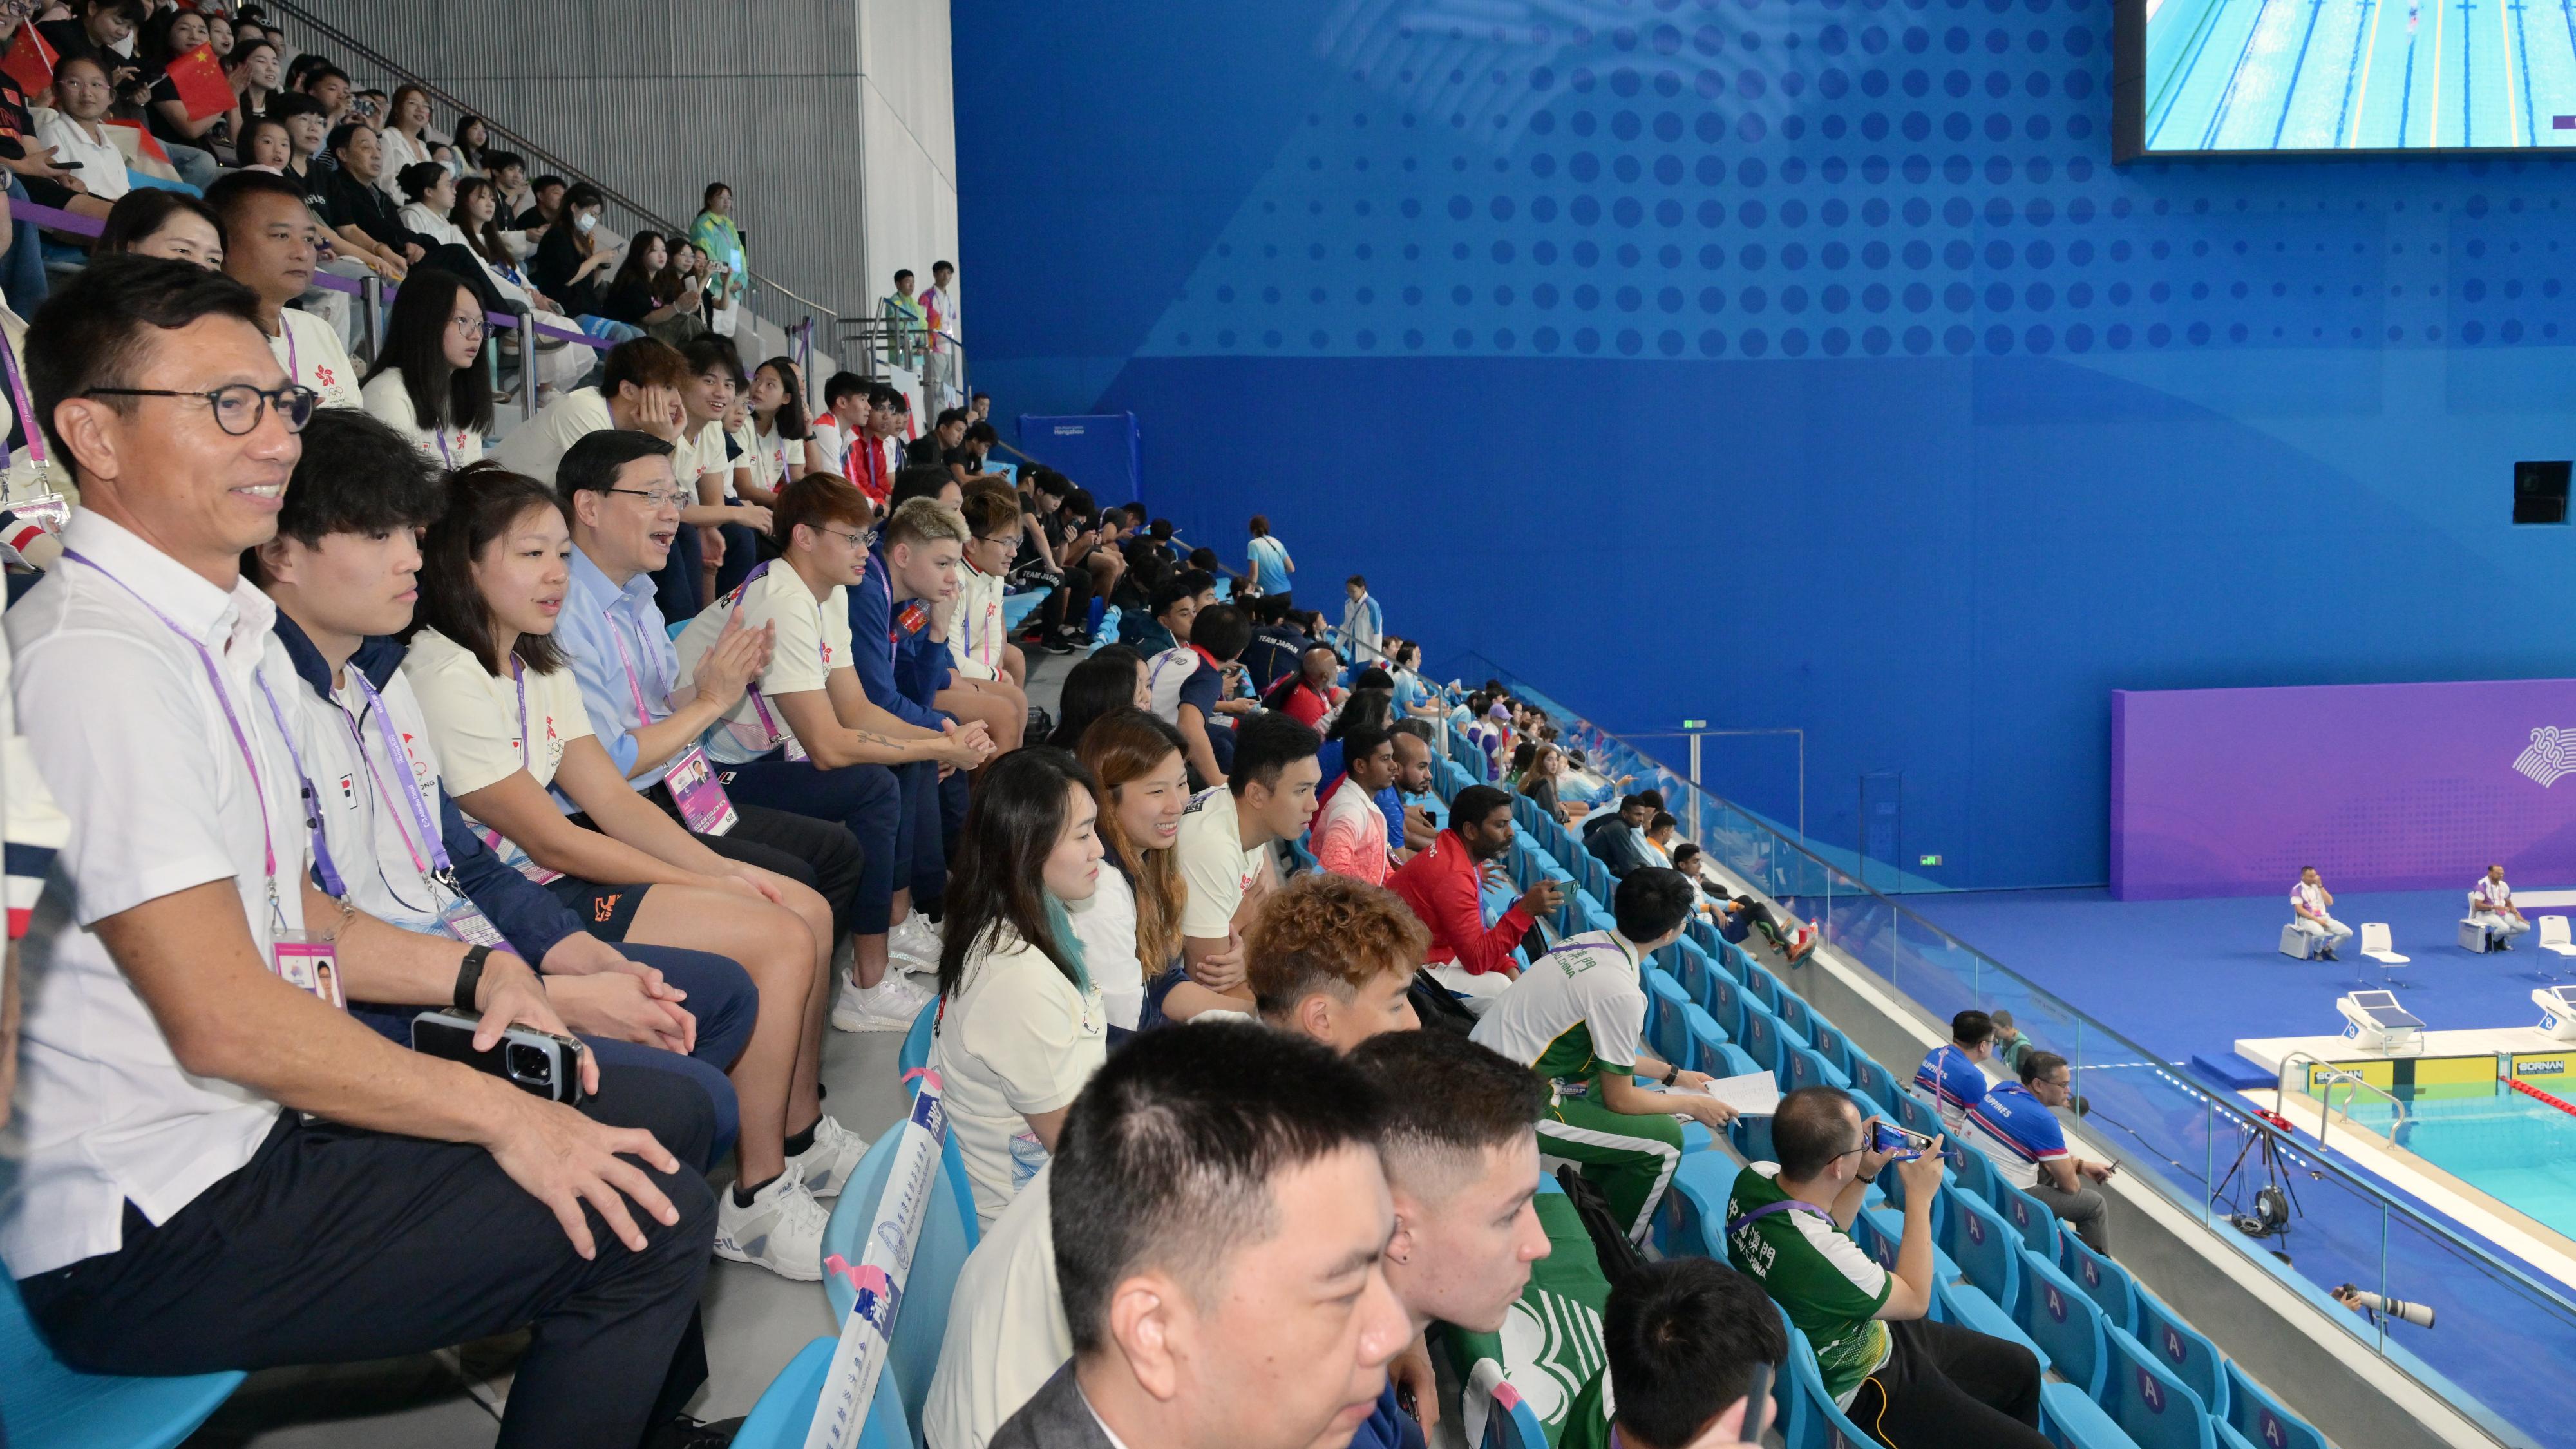 The Chief Executive, Mr John Lee, led a Hong Kong Special Administrative Region Government delegation to Hangzhou and continued his visit programme today (September 24). Photo shows Mr Lee (fourth right), accompanied by the Commissioner for Sports in the Culture, Sports and Tourism Bureau, Mr Sam Wong (first left), watching swimming competitions with Hong Kong athletes.